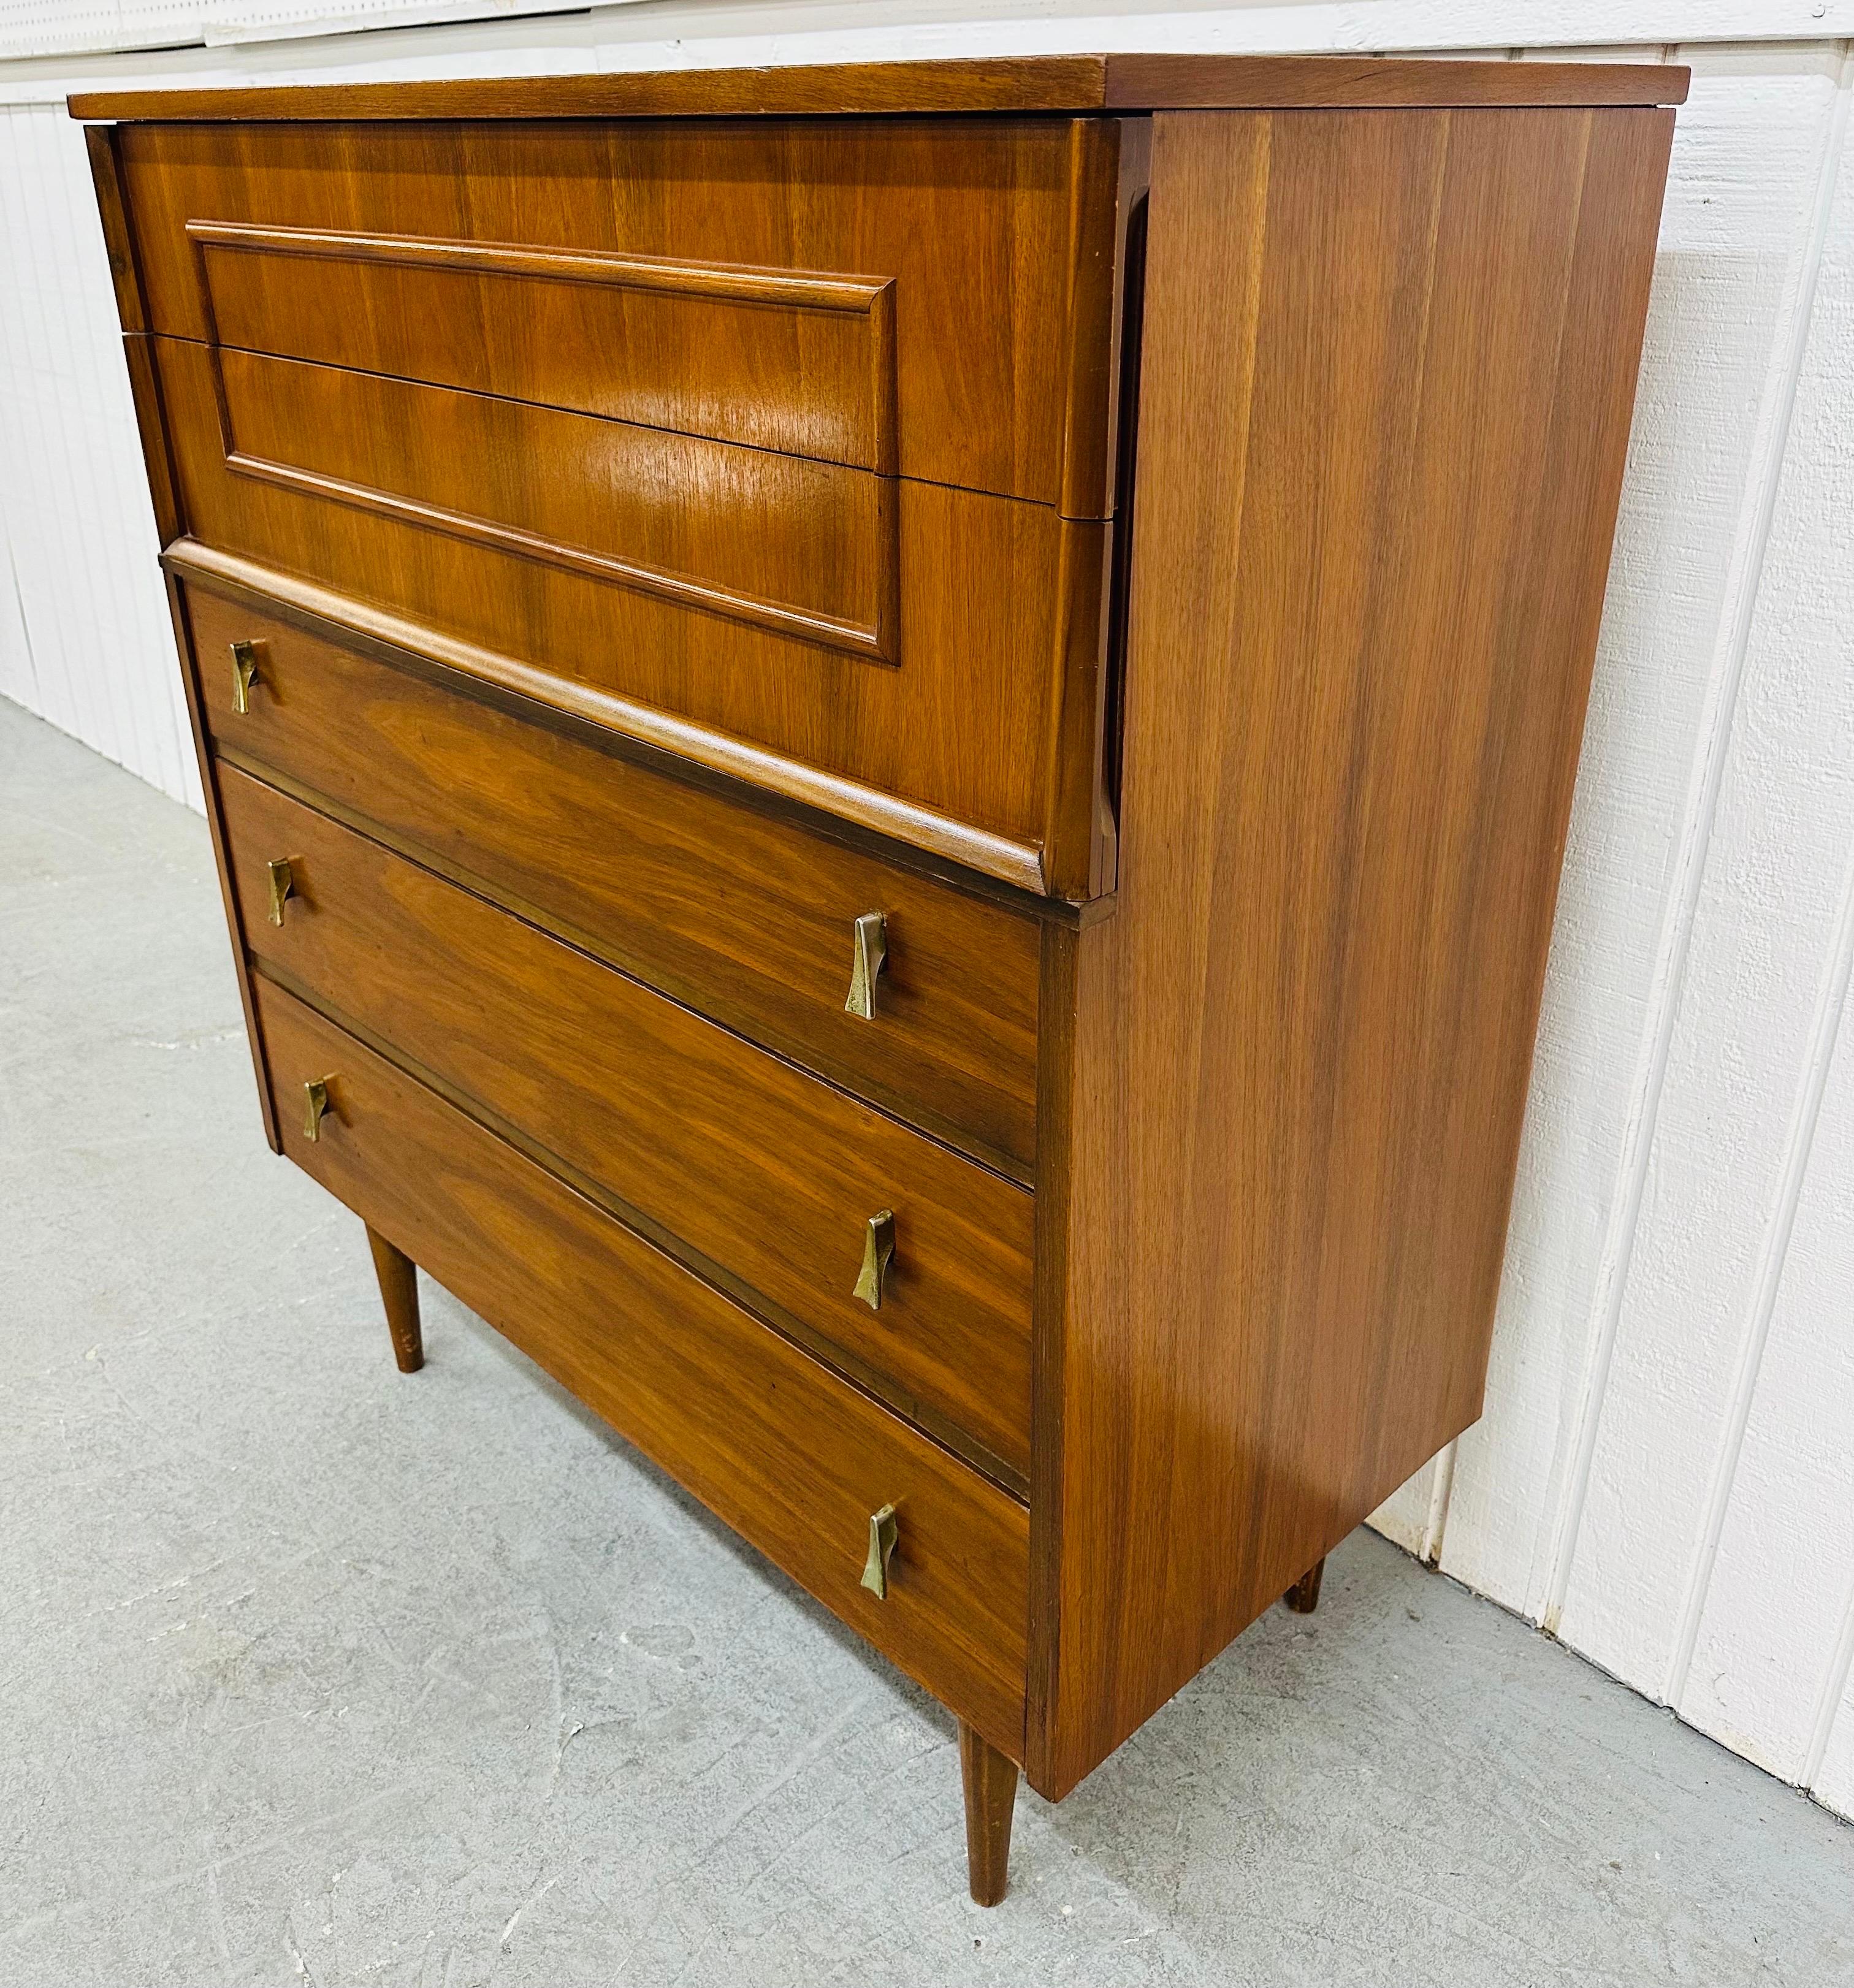 This listing is for a Mid-Century Modern Walnut High Chest. Featuring a straight line design, two drawers at the top with wooden pulls, three drawers at the bottom with original brass hardware, modern legs, and a beautiful walnut finish. This is an